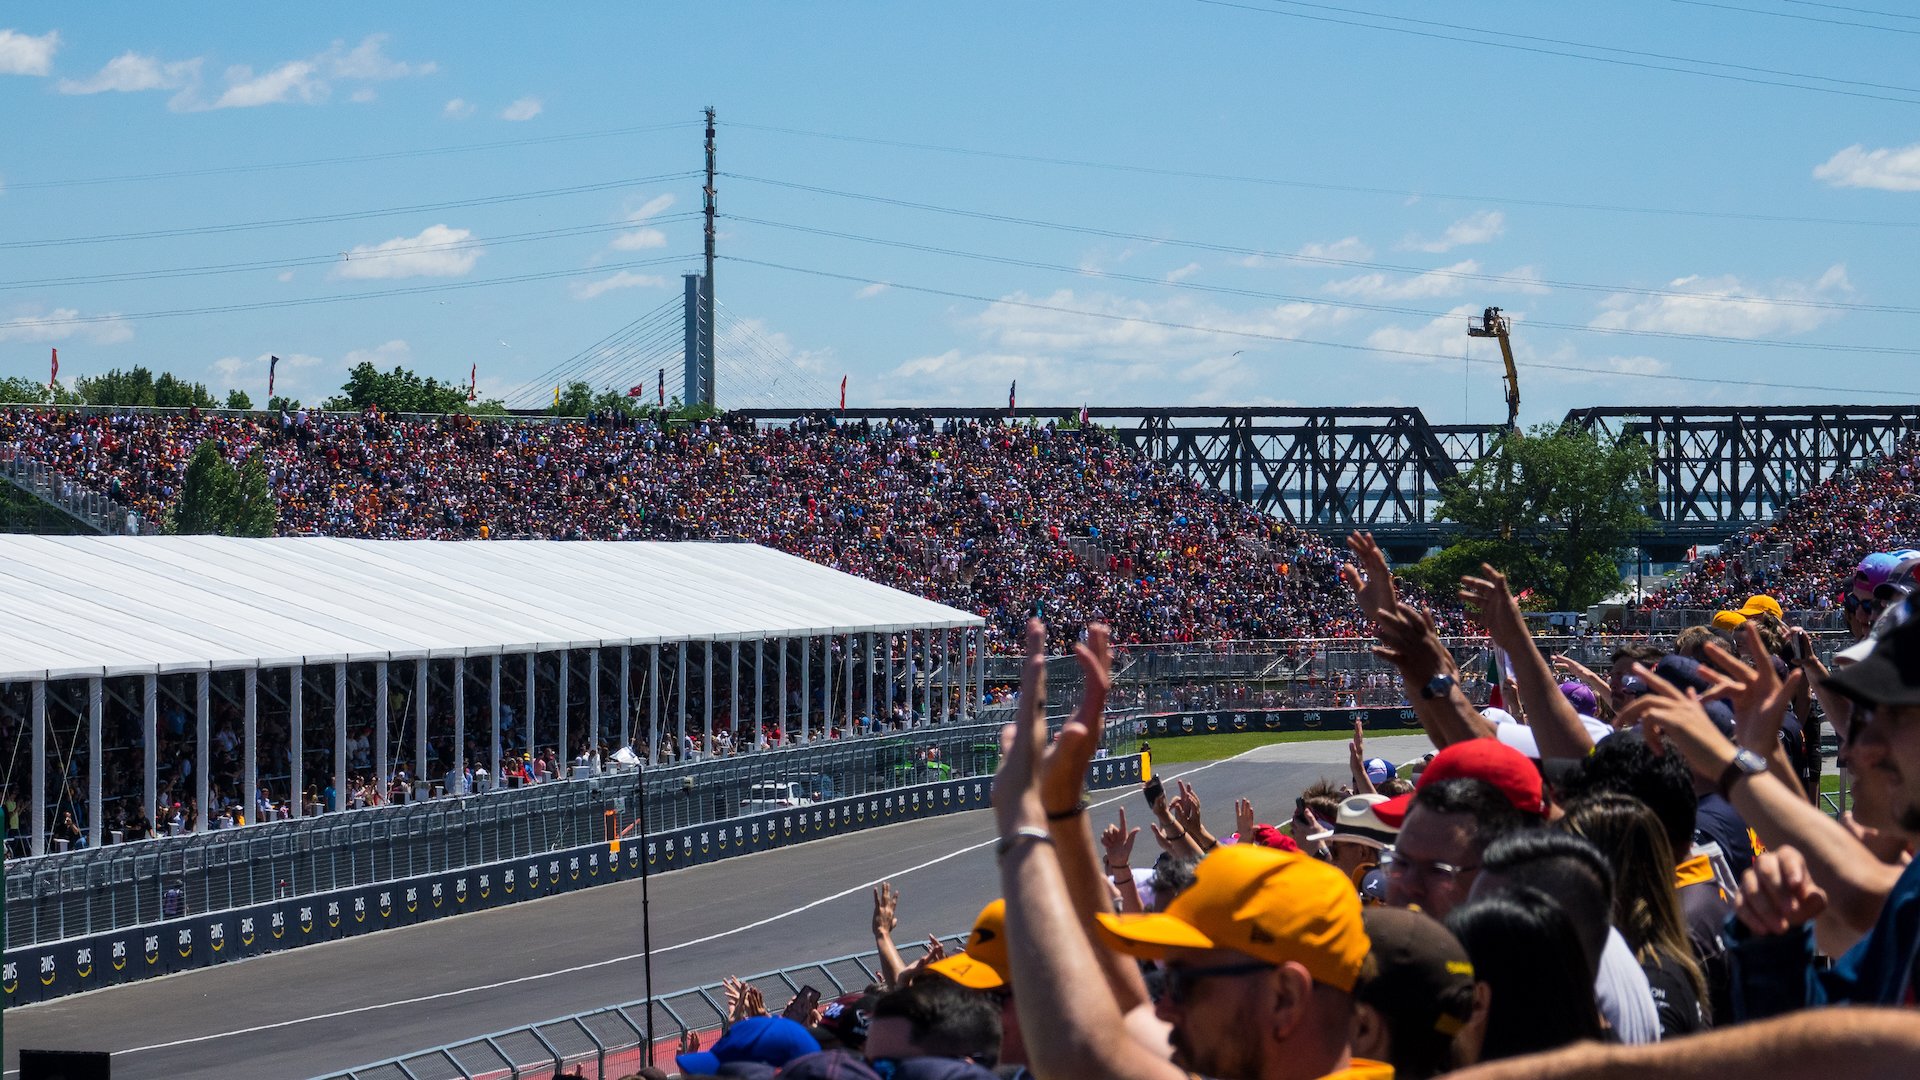  The grandstands were packed! 